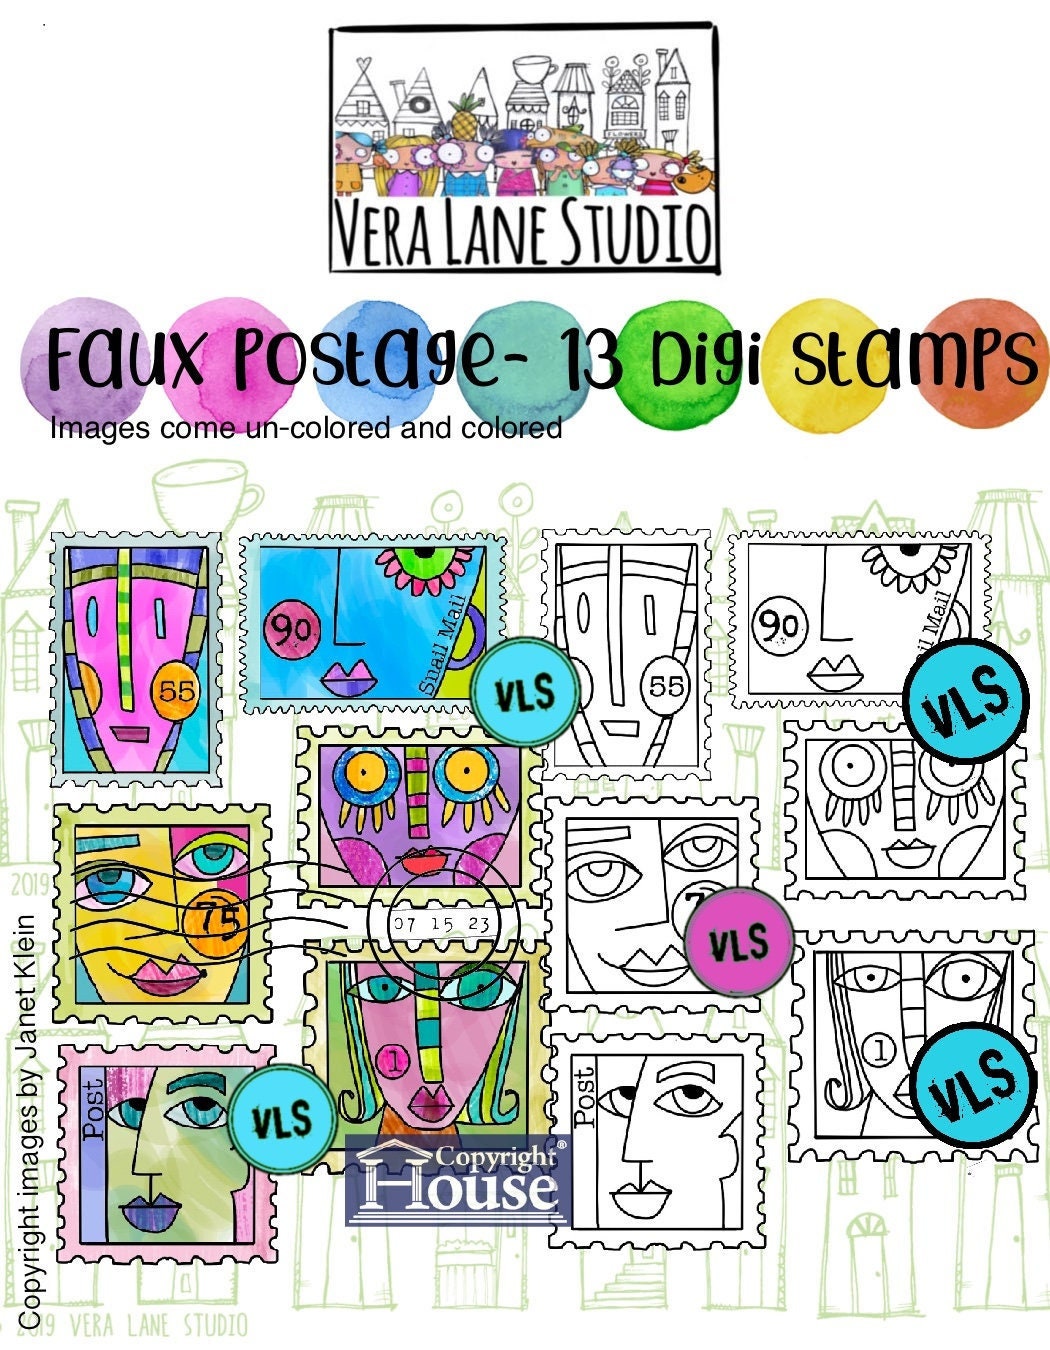 Faux postage - 13 Digi stamps in jpg and png files